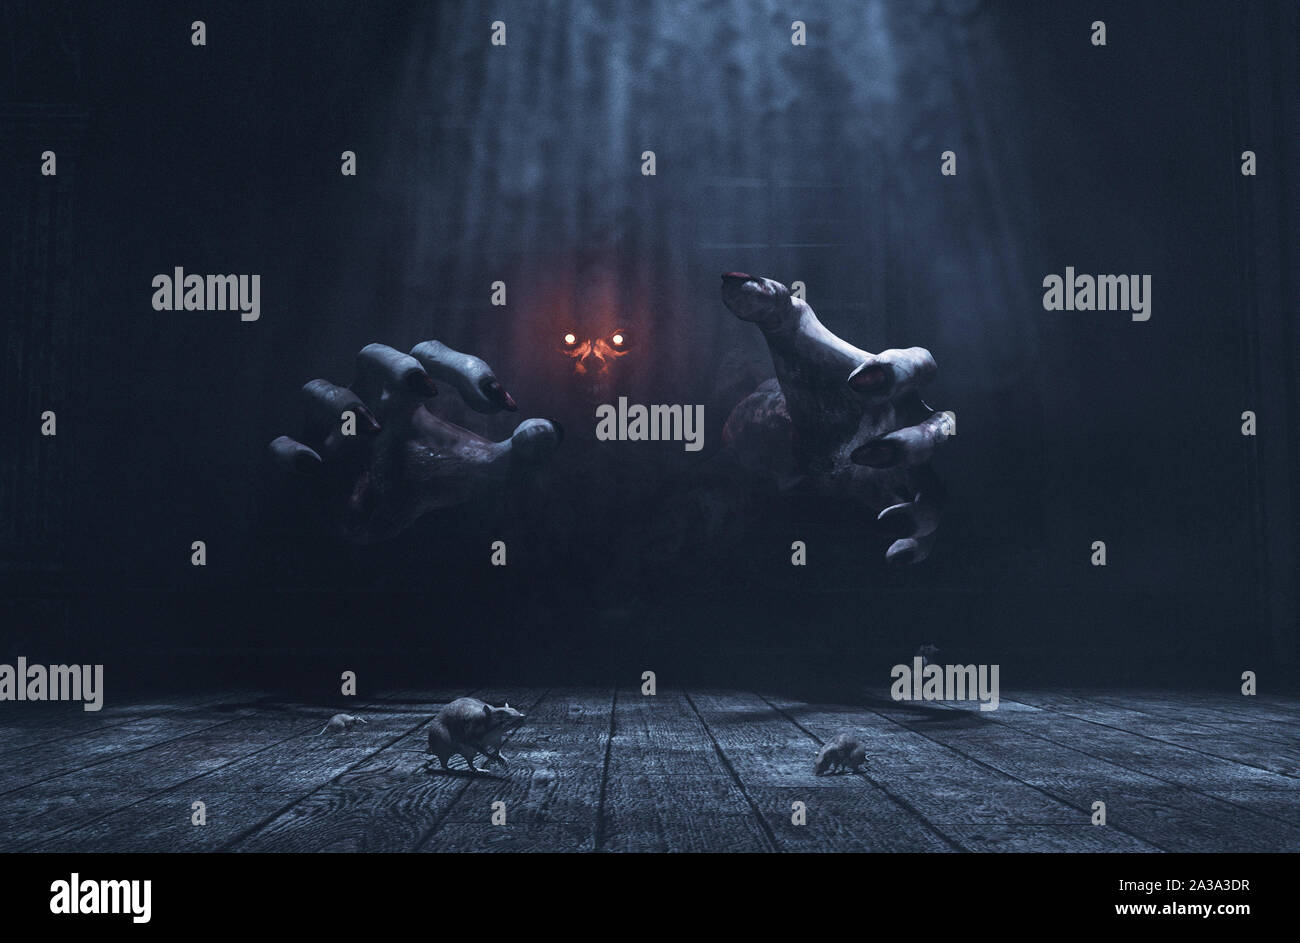 The dwelling,The place has it own devil,Monster in haunted house,3d illustration Stock Photo